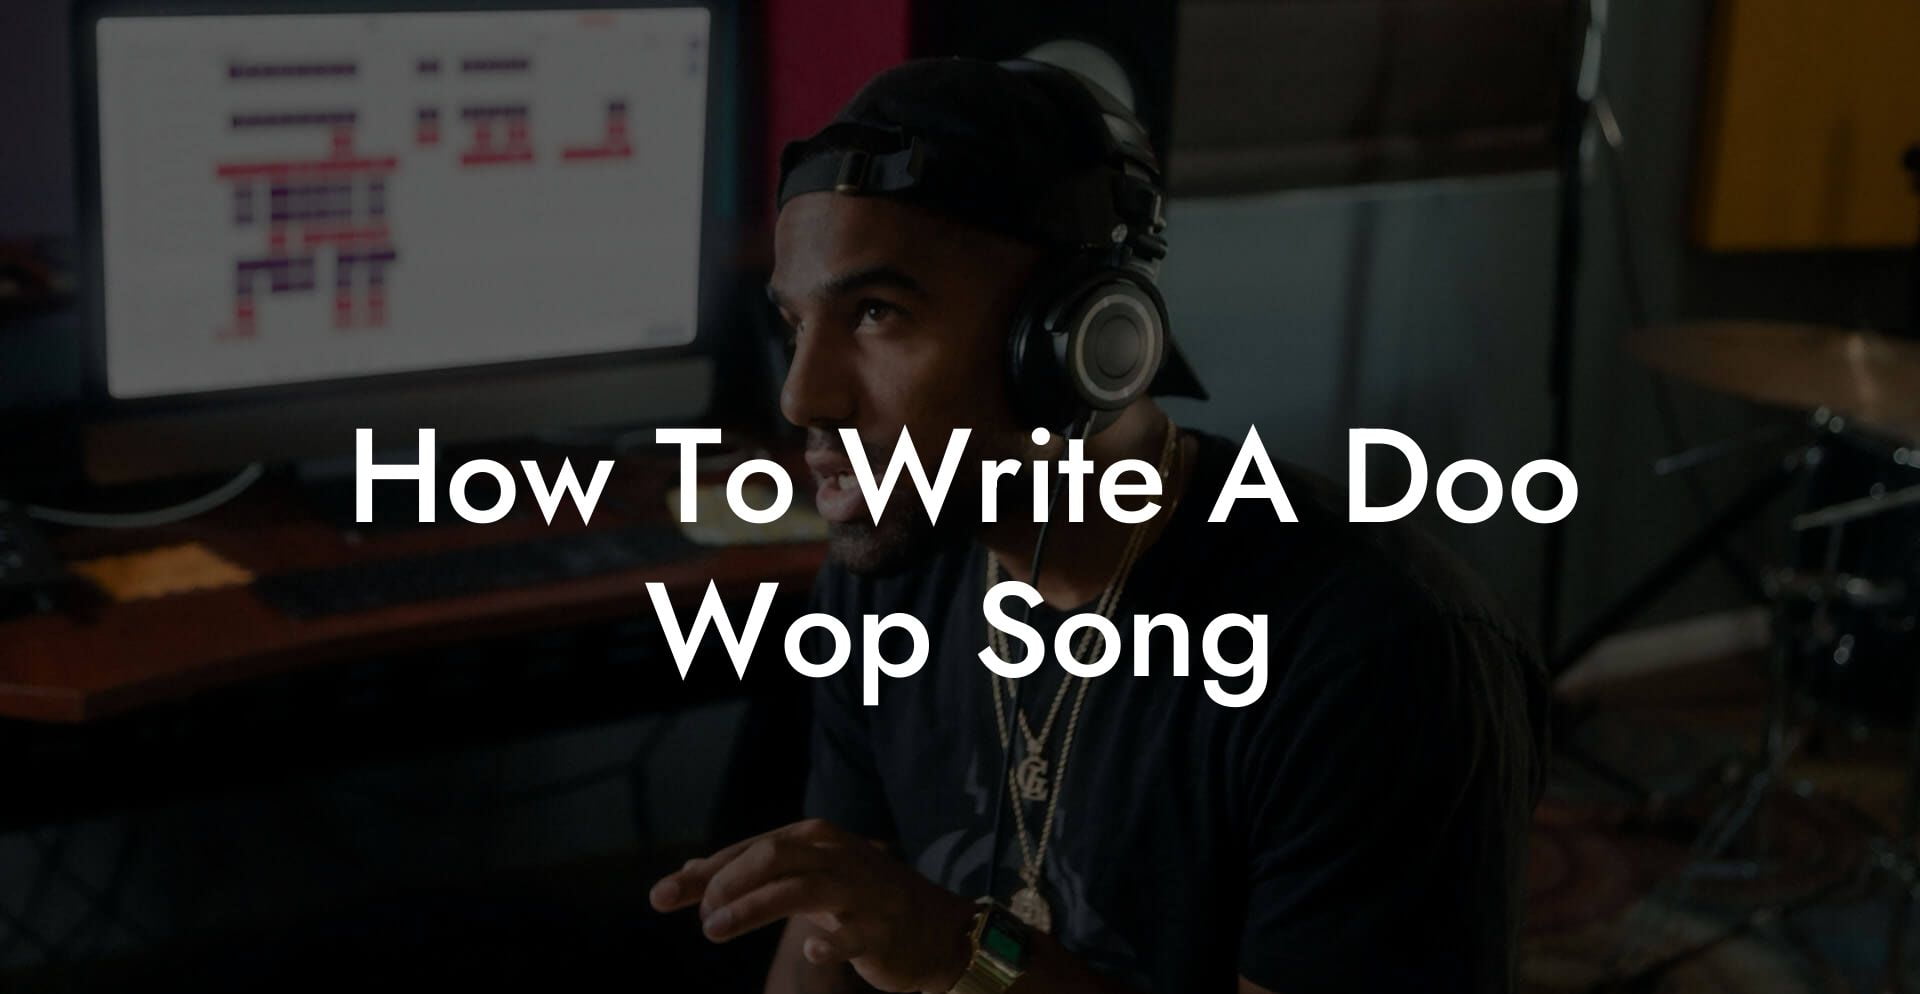 how to write a doo wop song lyric assistant